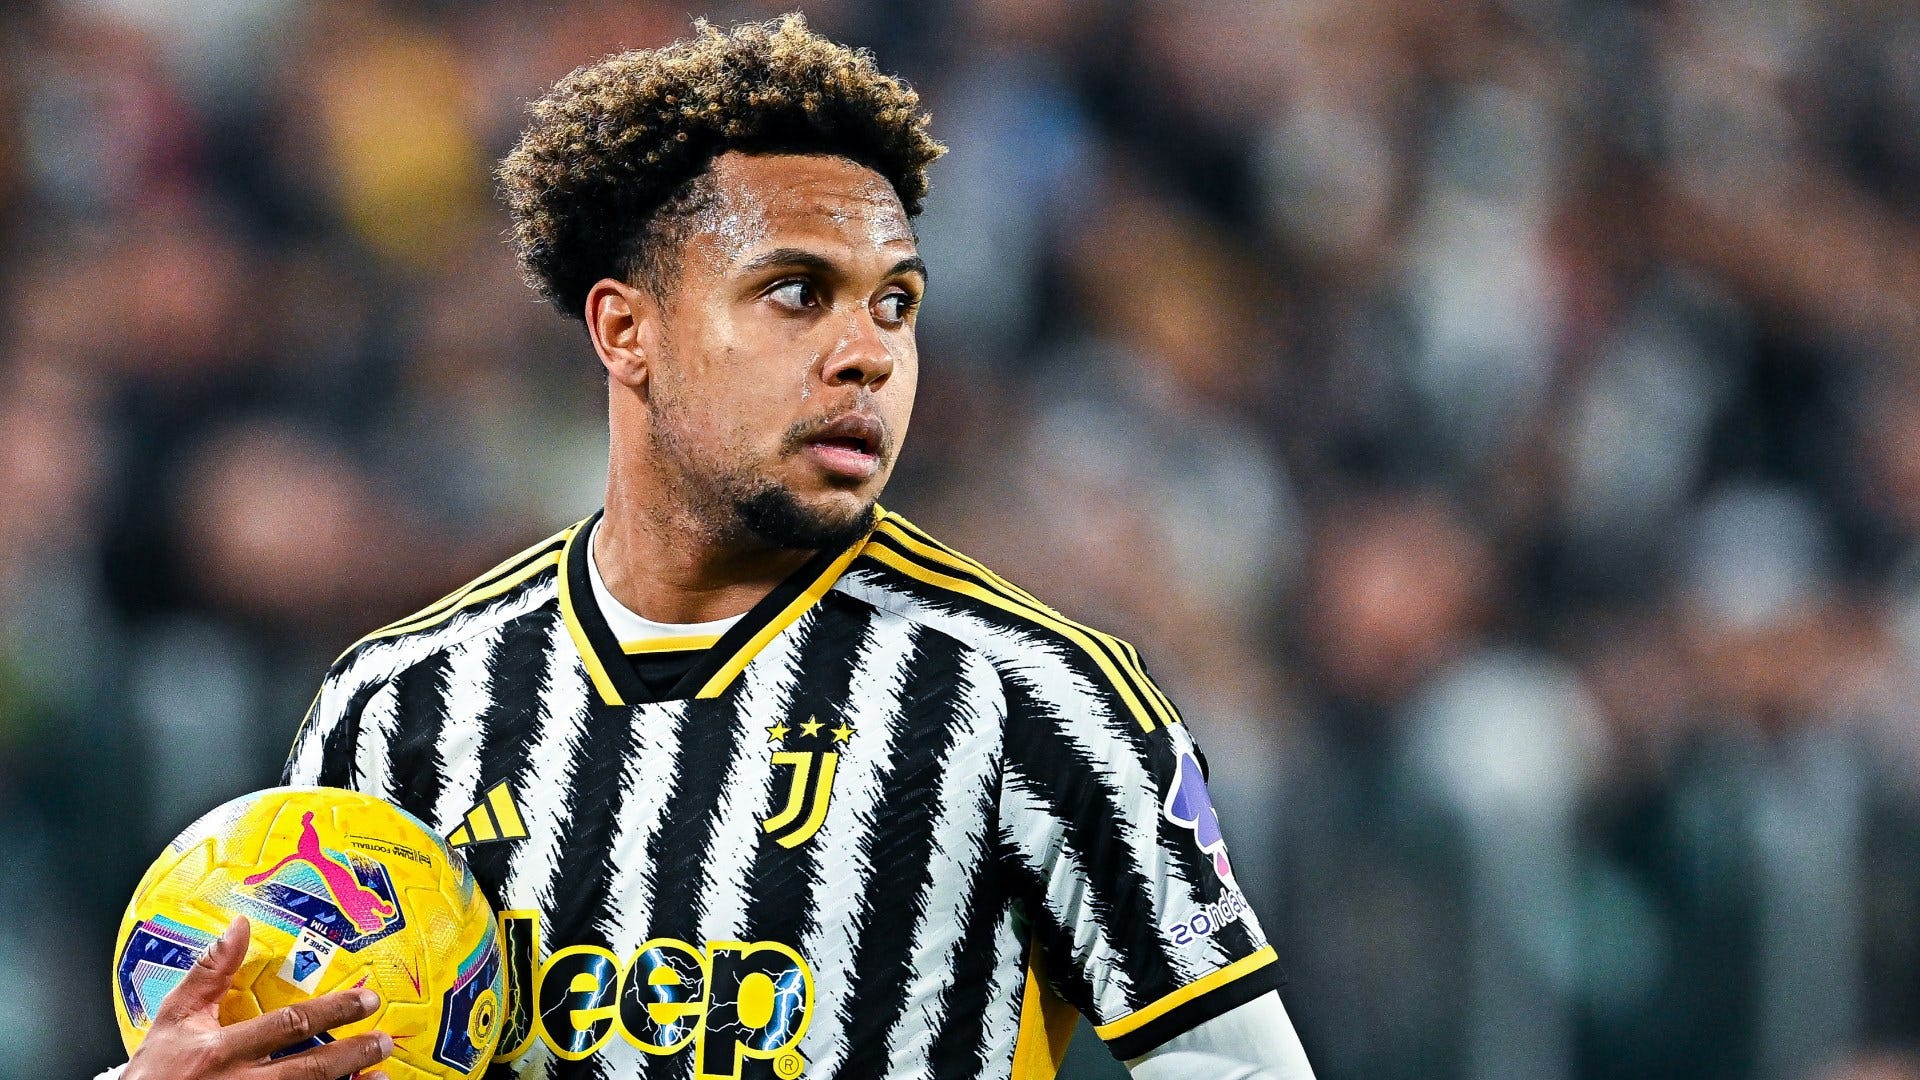 USMNT stars Weston McKennie and Tim Weah fail to spark Juventus to victory  as Bianconeri's title hopes all but fade with woeful loss to  relegation-threatened Udinese